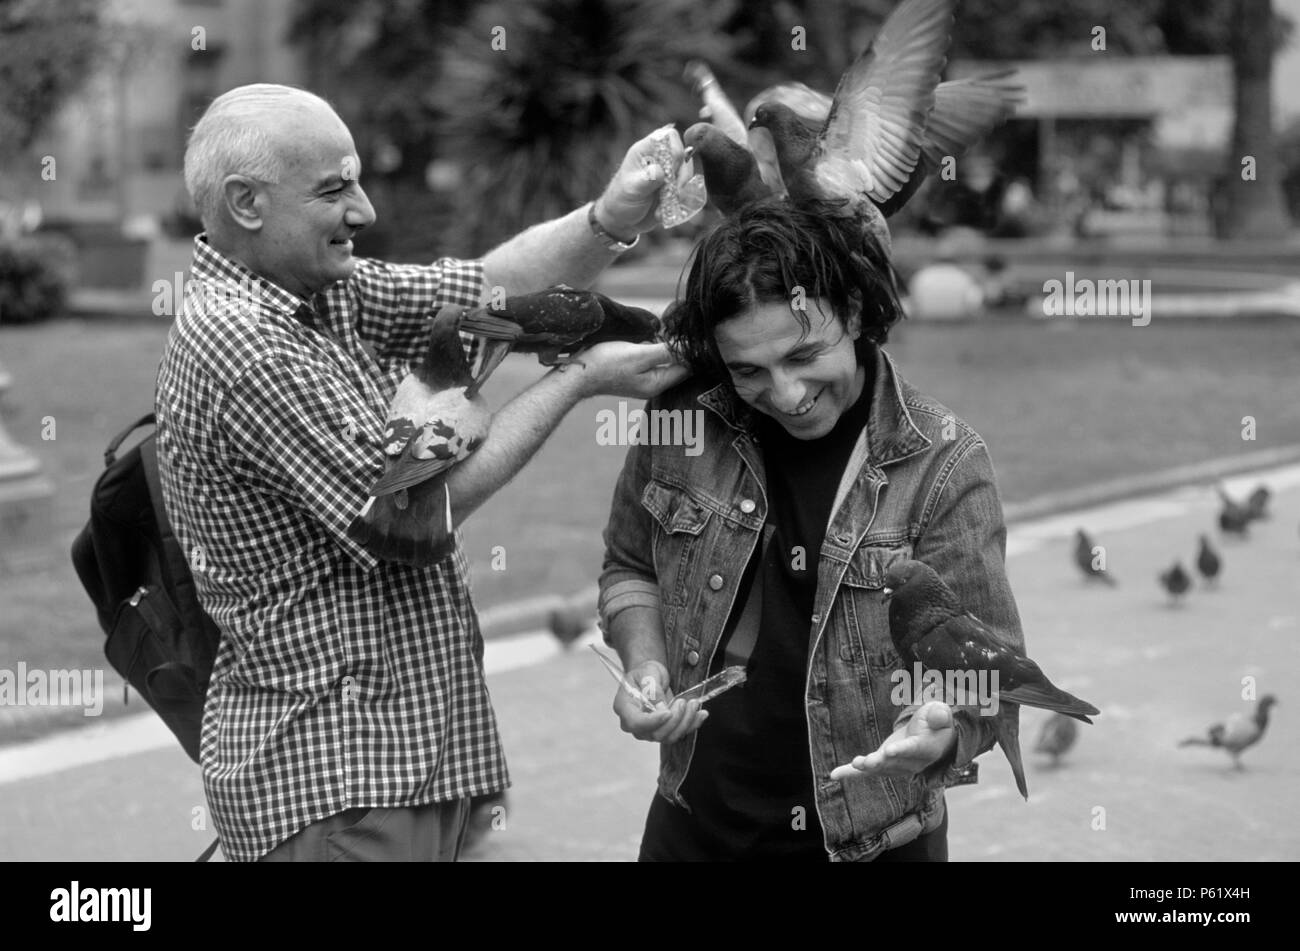 MEN FEEDING PIGEONS in PLAZA DE MAYO in the MICROCENTER district - BUENOS AIRES, ARGENTINA Stock Photo